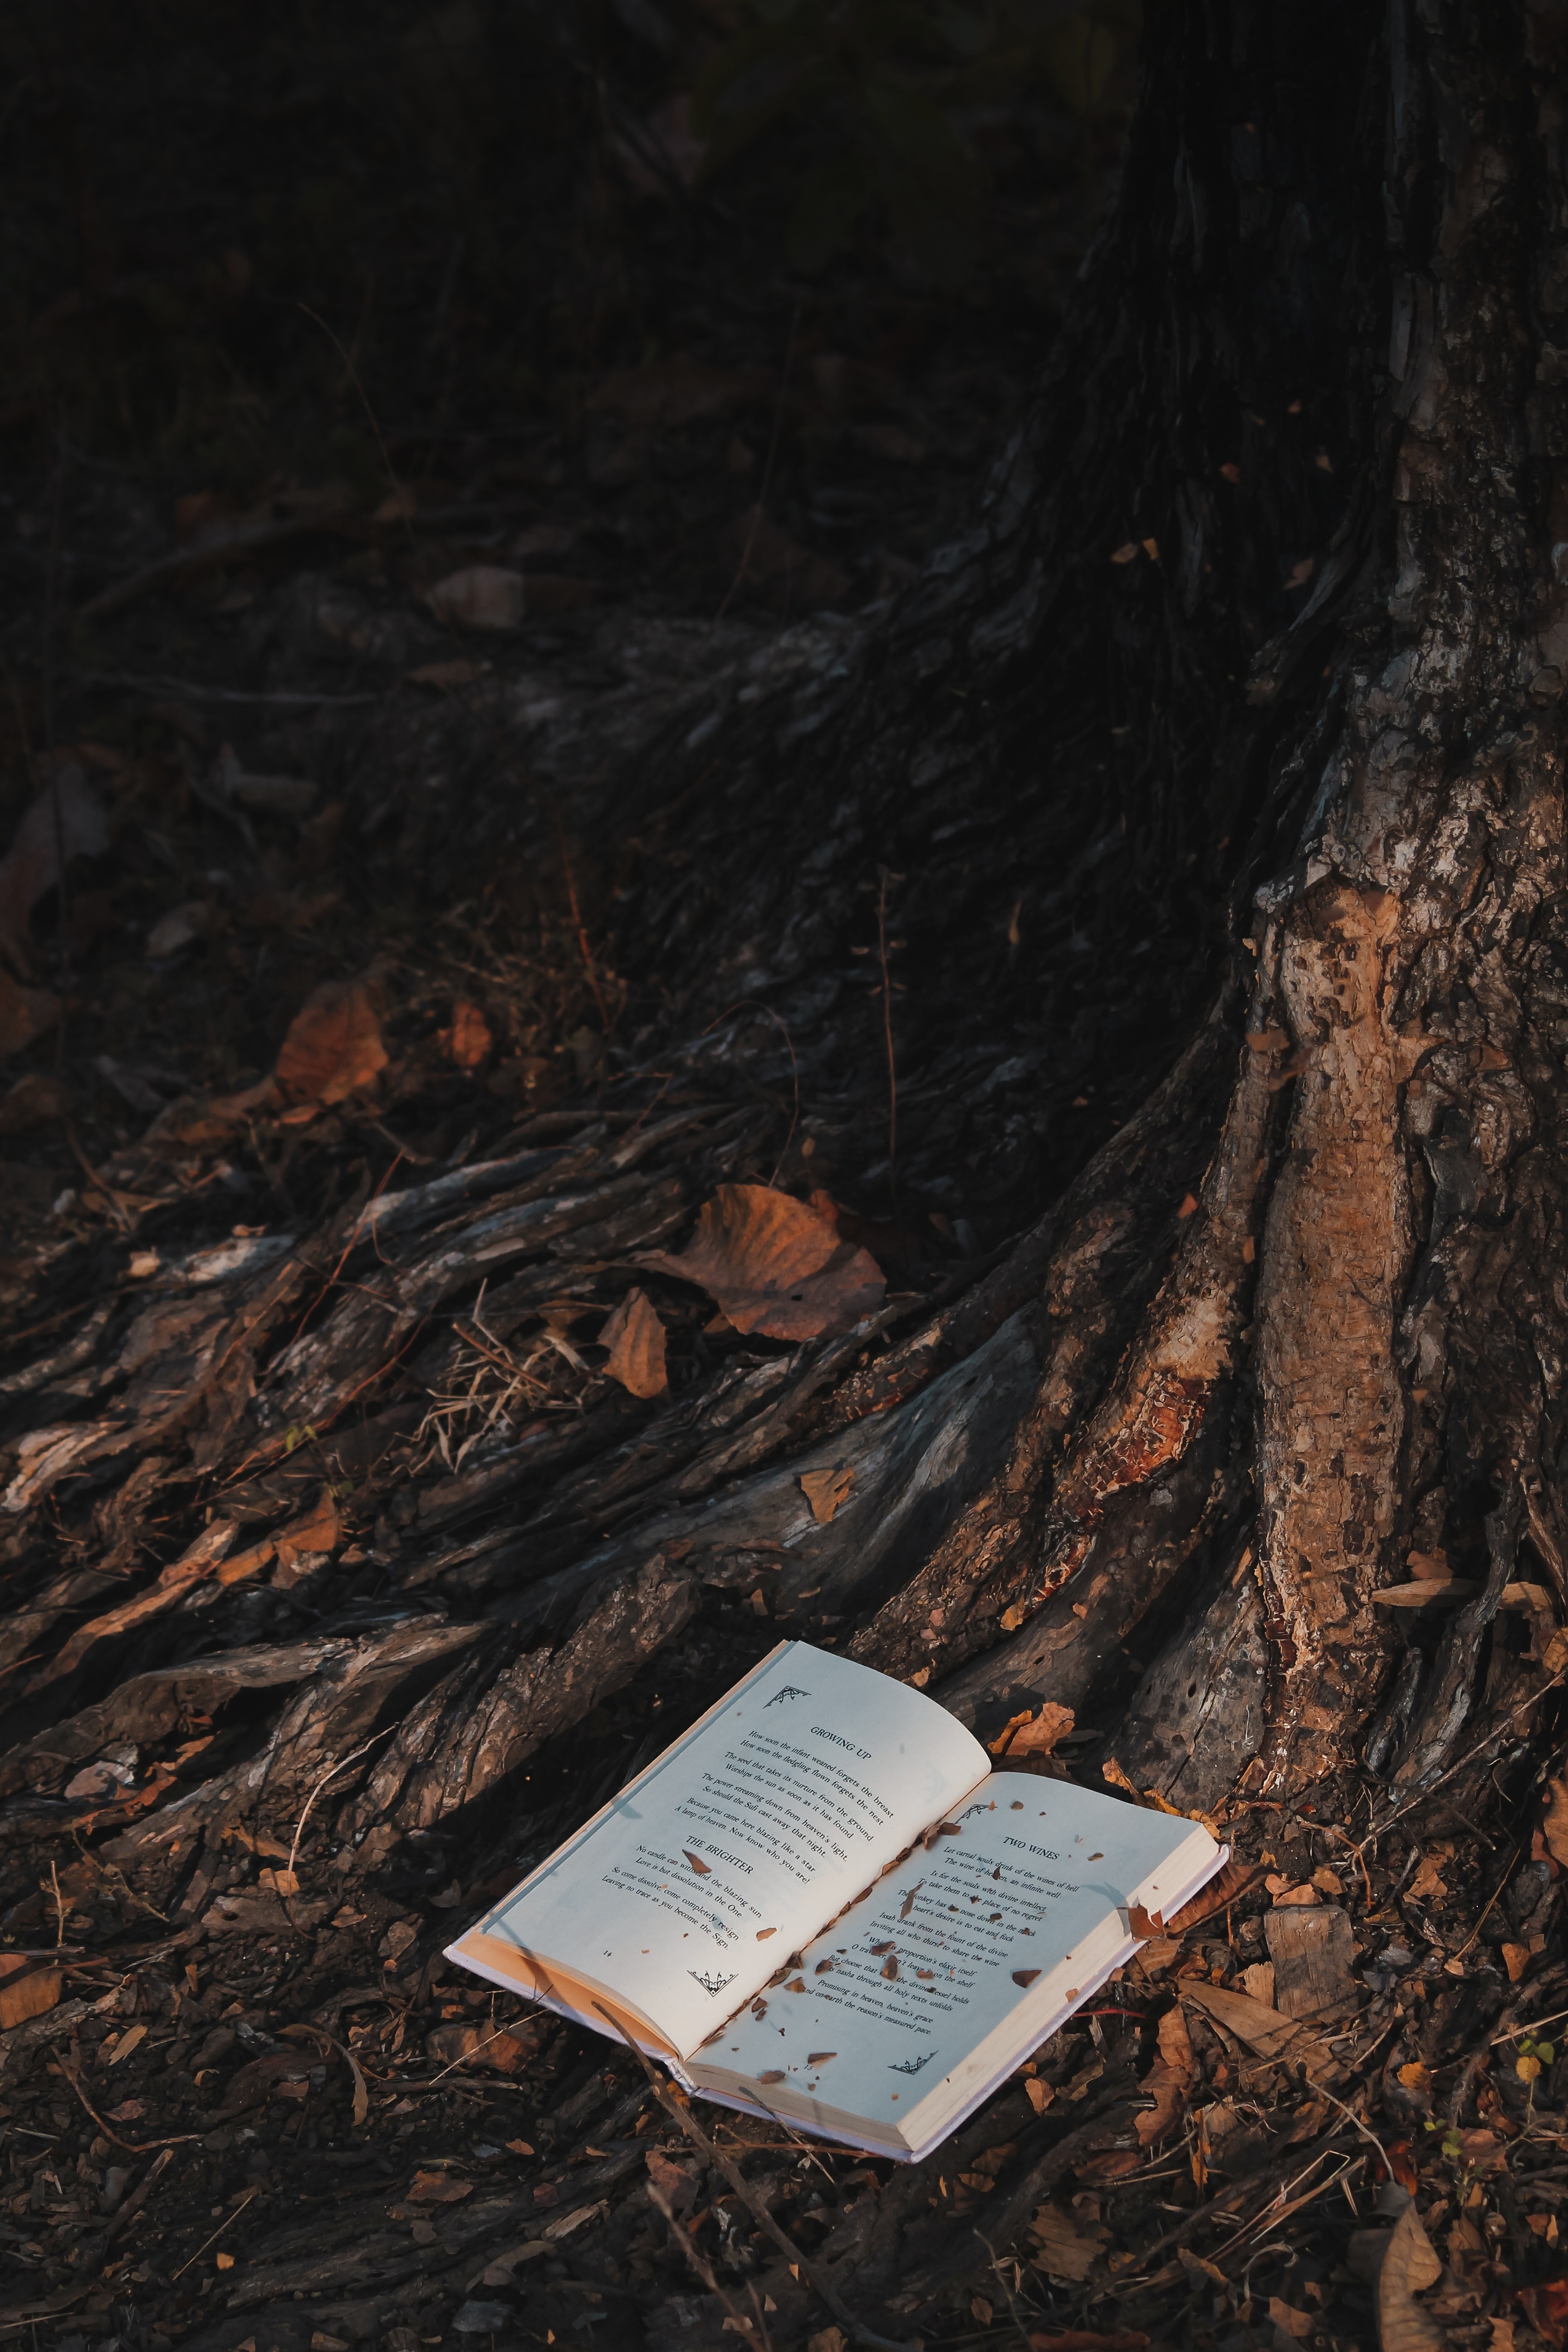 miscellanea, wood, forest, book, miscellaneous, tree 1080p